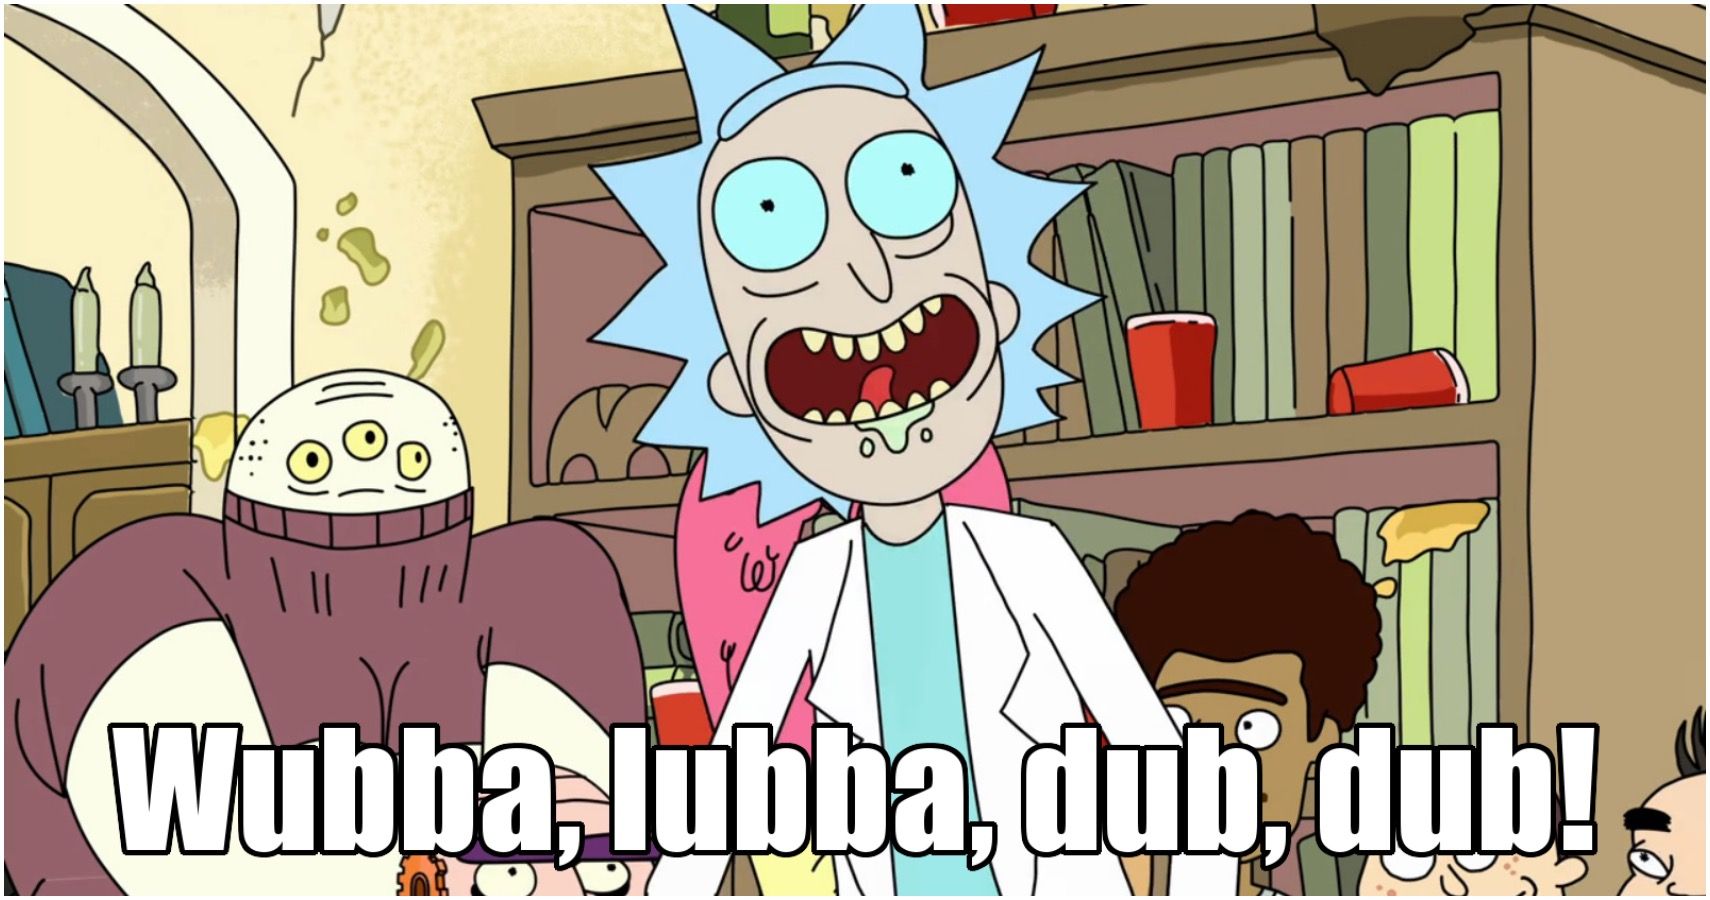 Ugle Tilfældig At vise Wubba Lubba Dub Dub: 10 Of The Best Rick Quotes From Rick And Morty